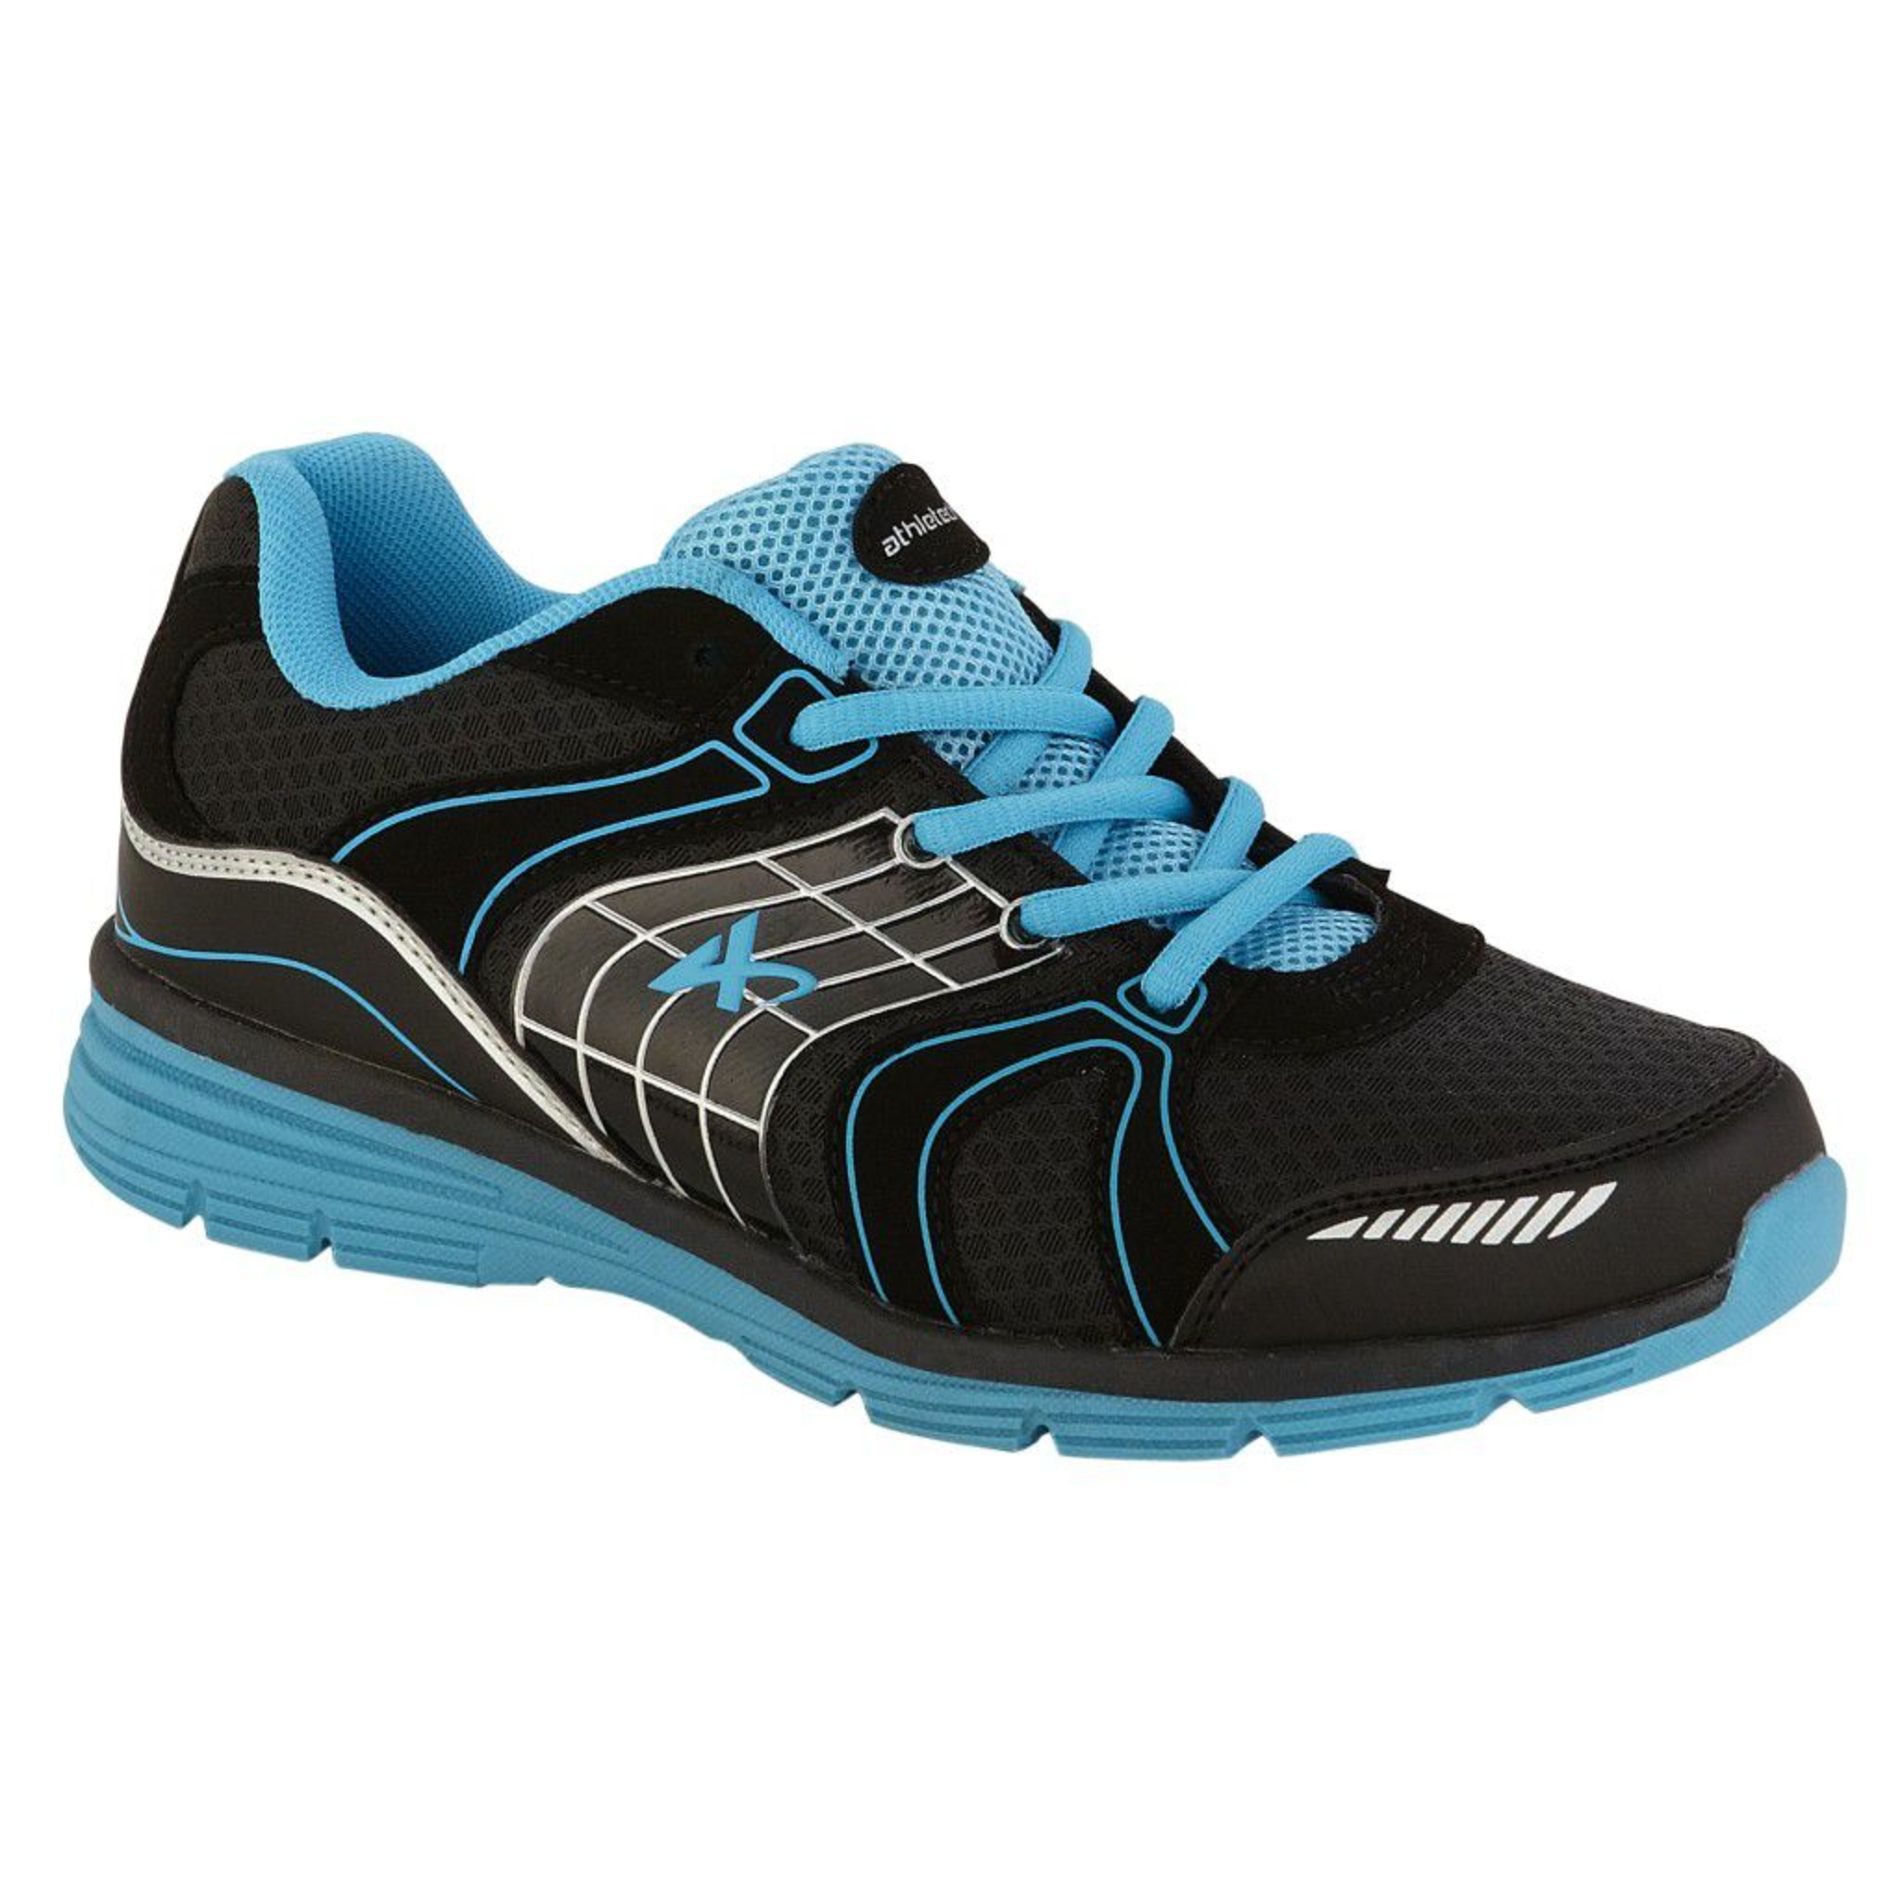 Athletech Women's Ath L-Willow 2 Athletic Shoe - Black/Teal